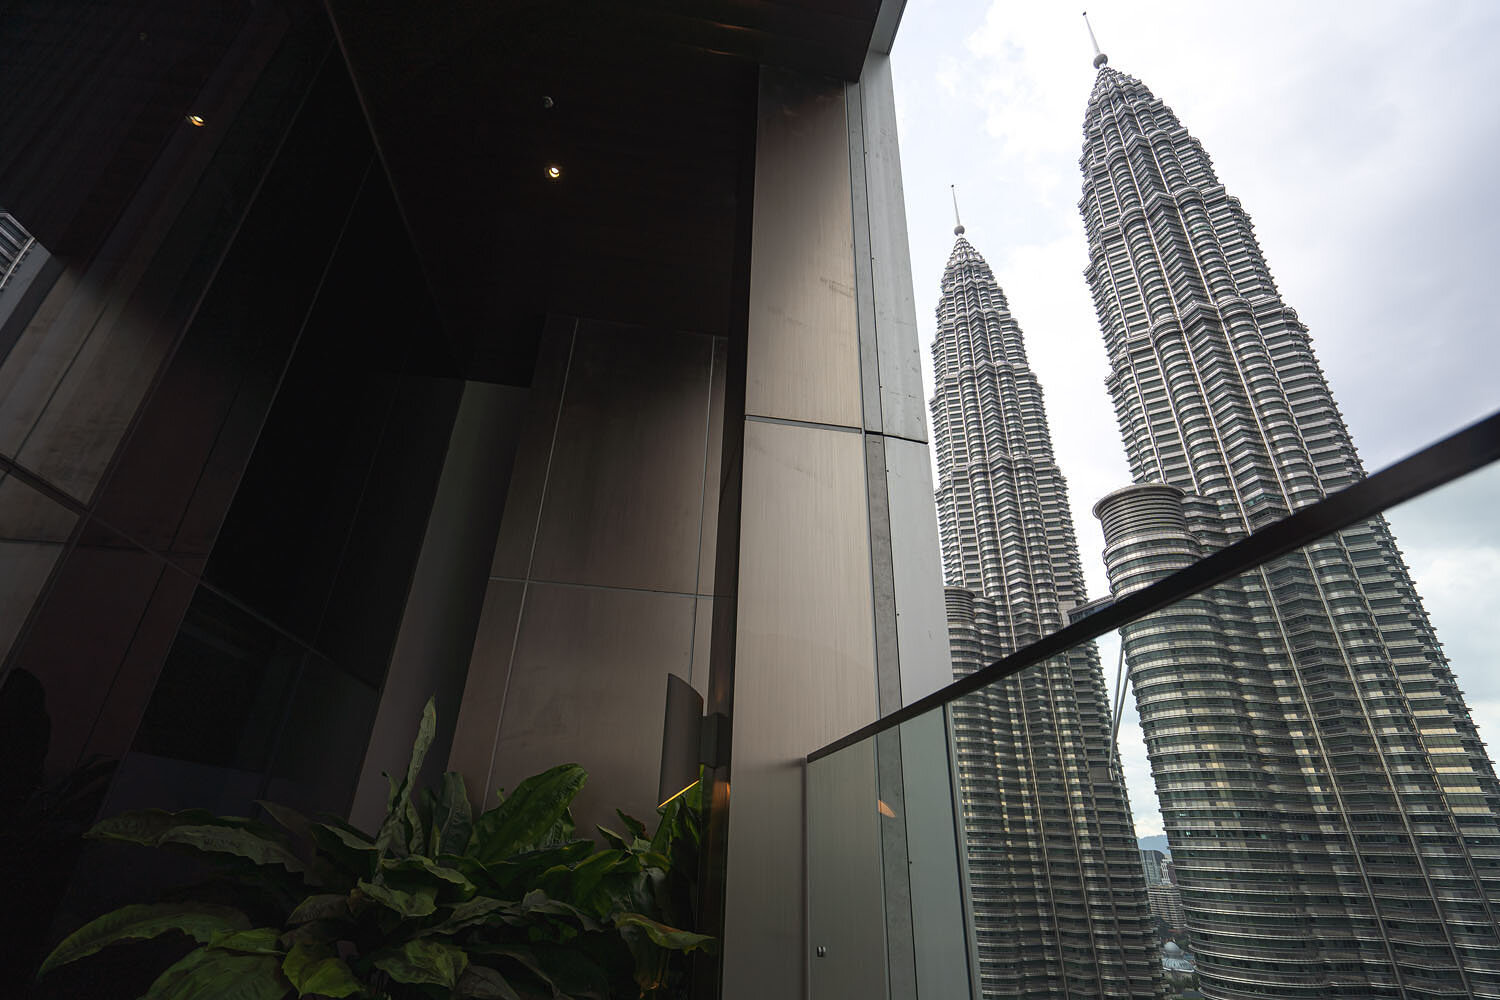  View of Petronas towers from the balcony 